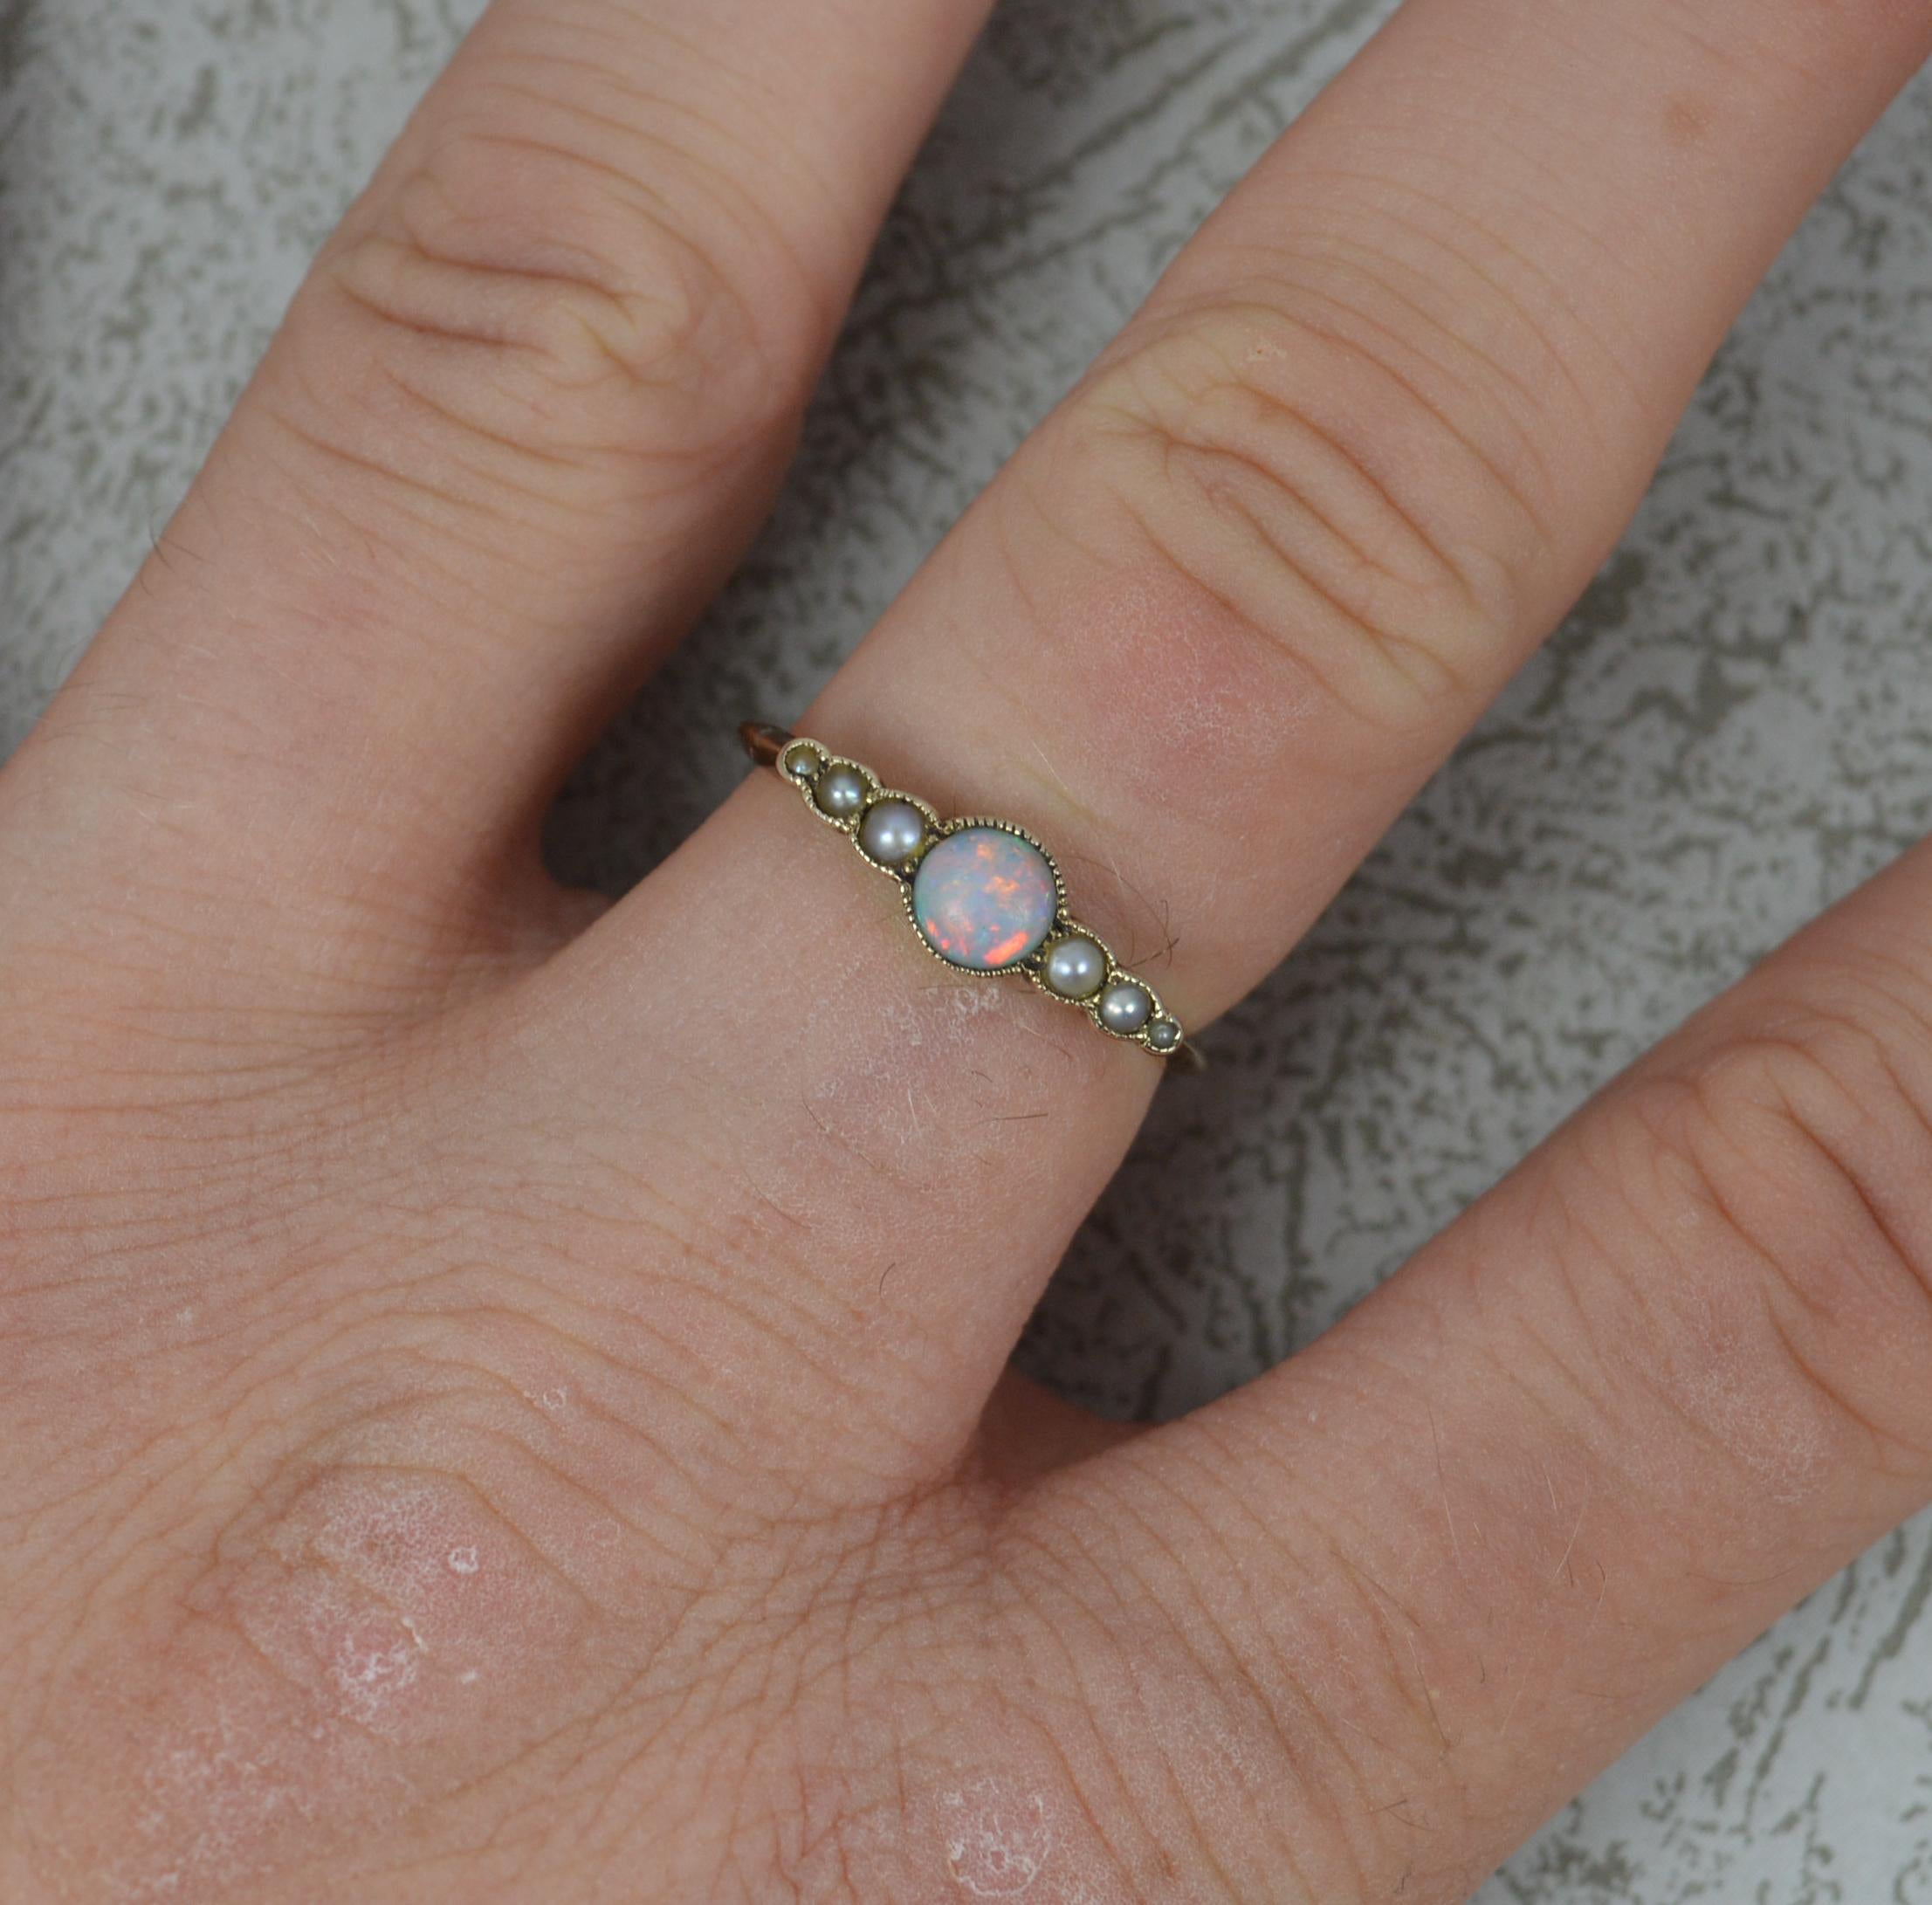 A late Victorian ring. c1900.
Solid 9 carat rose gold example. Set with a natural round opal to centre with three small seed pearls to each side.
Natural opal, flashes of all colours.
Size N 1/2 UK, 7 US. Sizeable. 1.7 Grams. 17mm spread of stones.